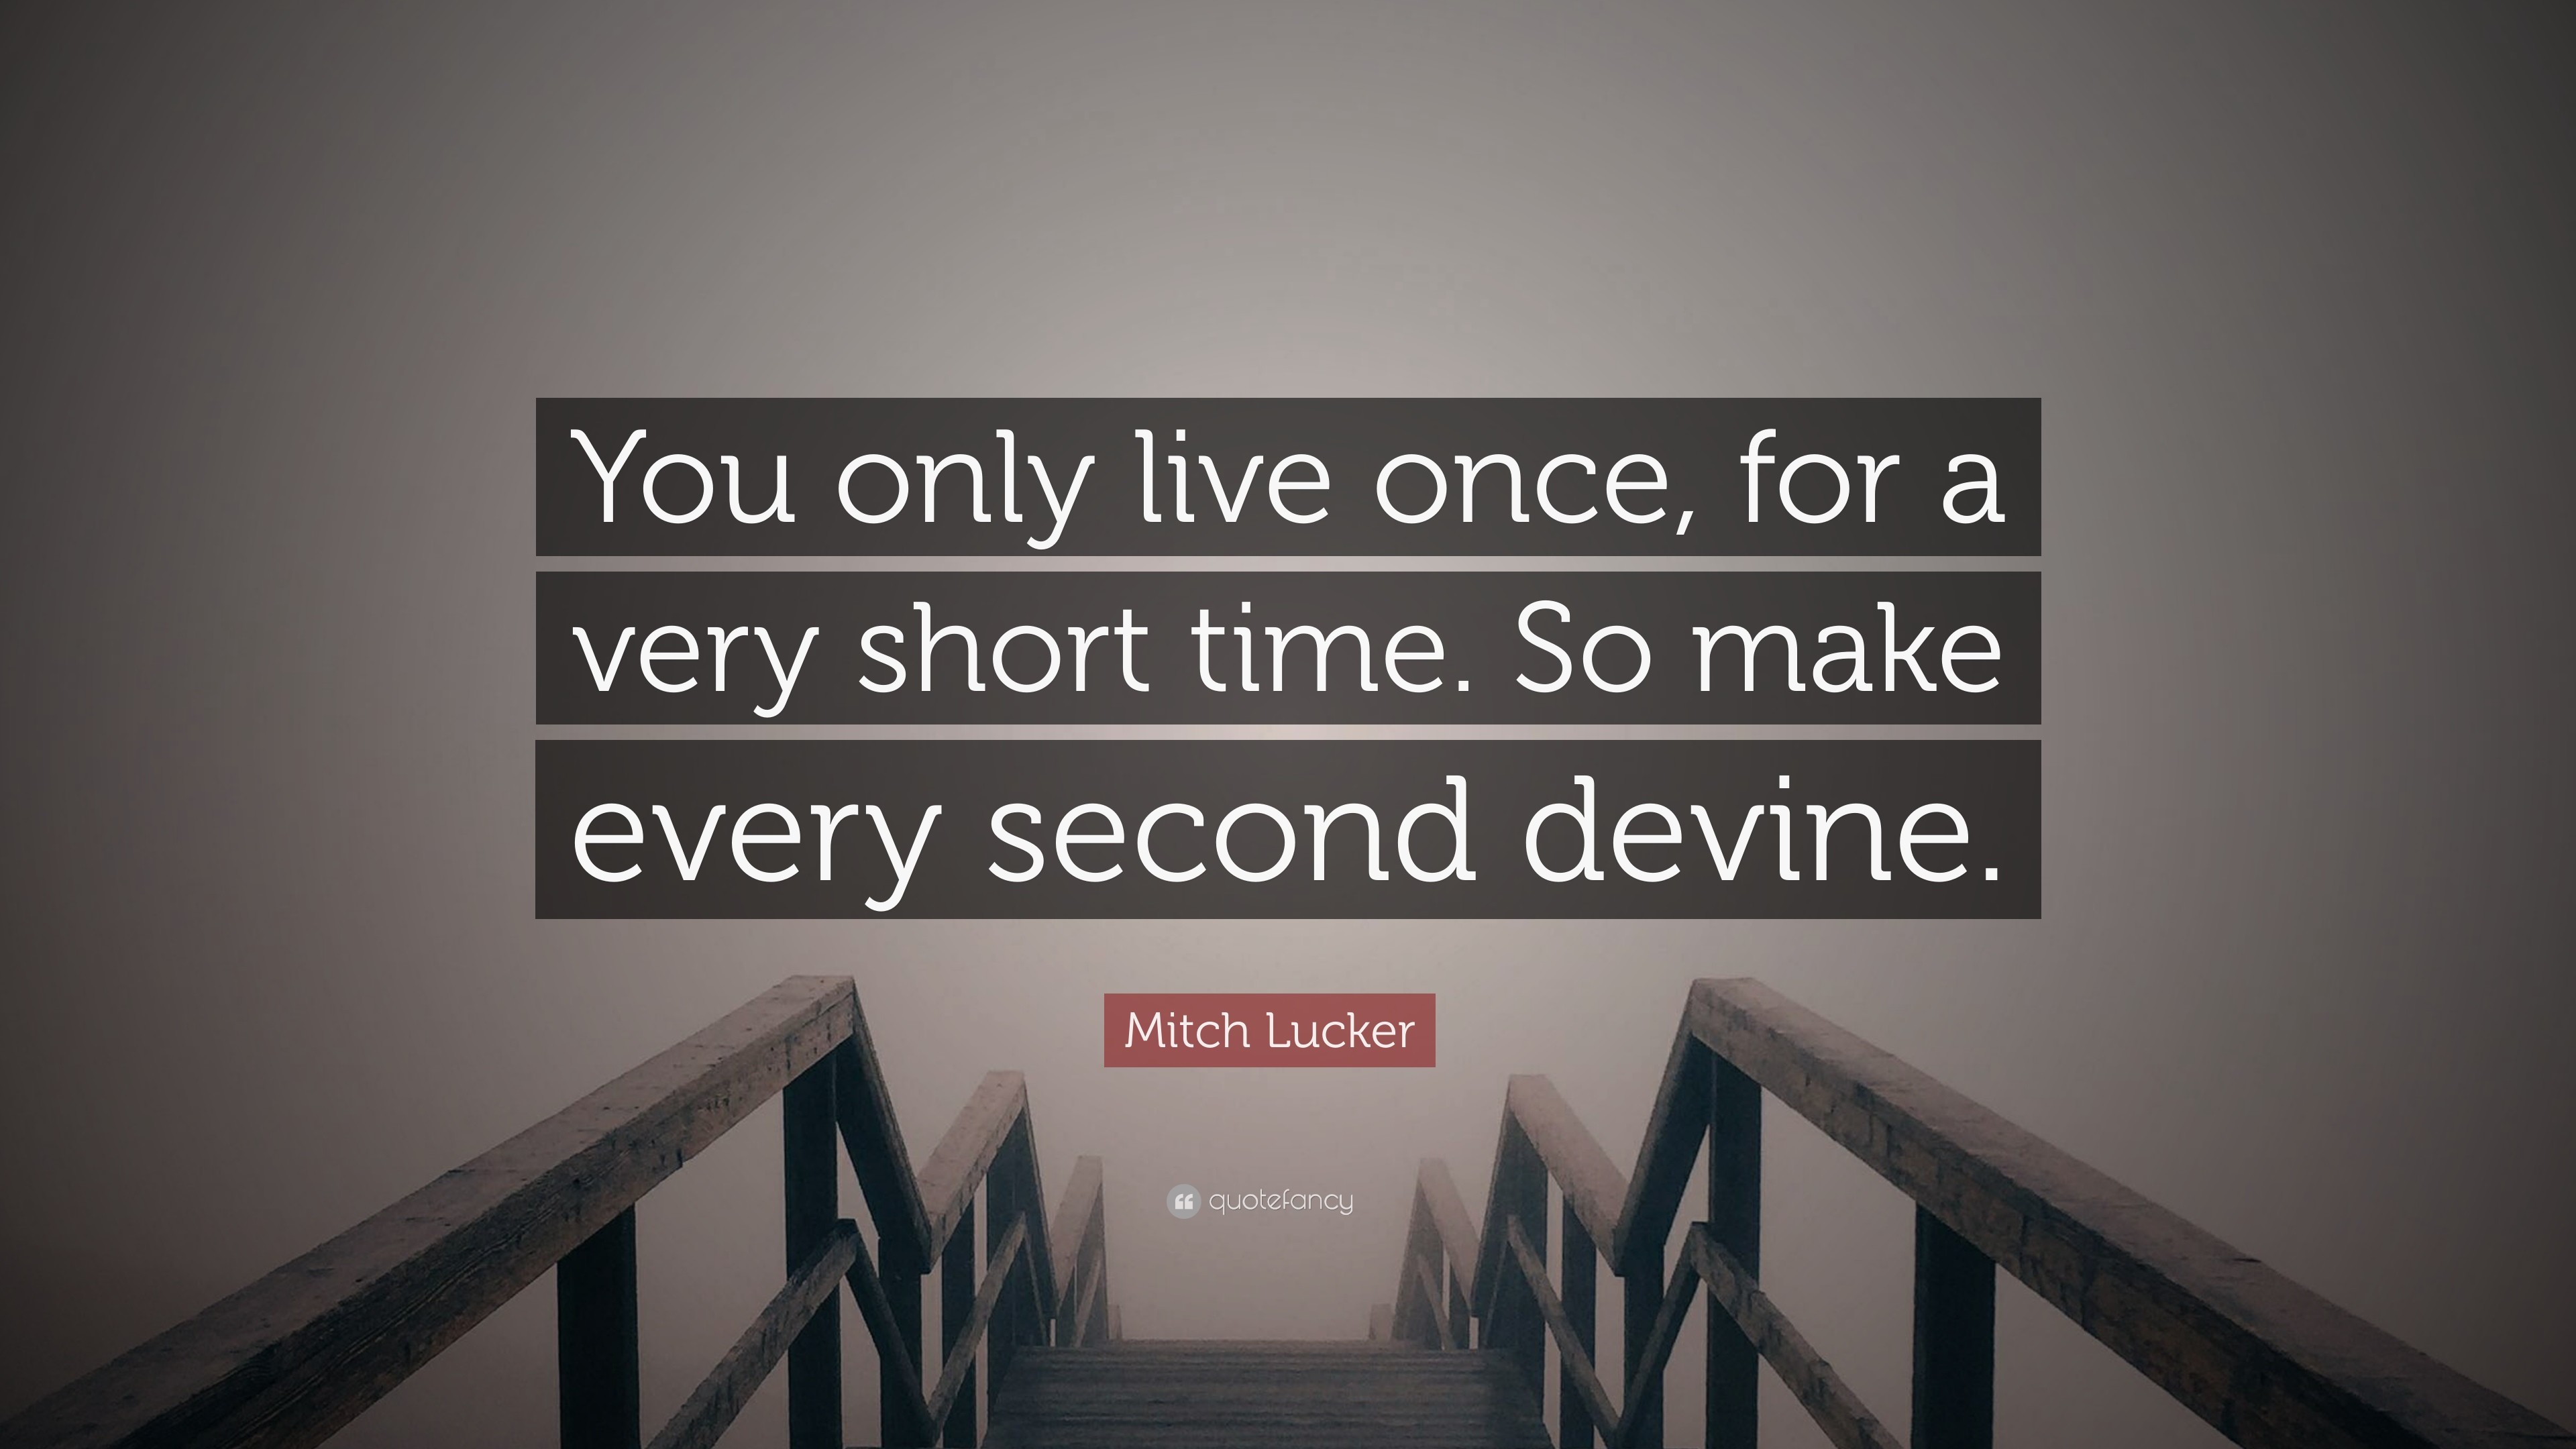 3840x2160 Mitch Lucker Quote: “You only live once, for a very short time.